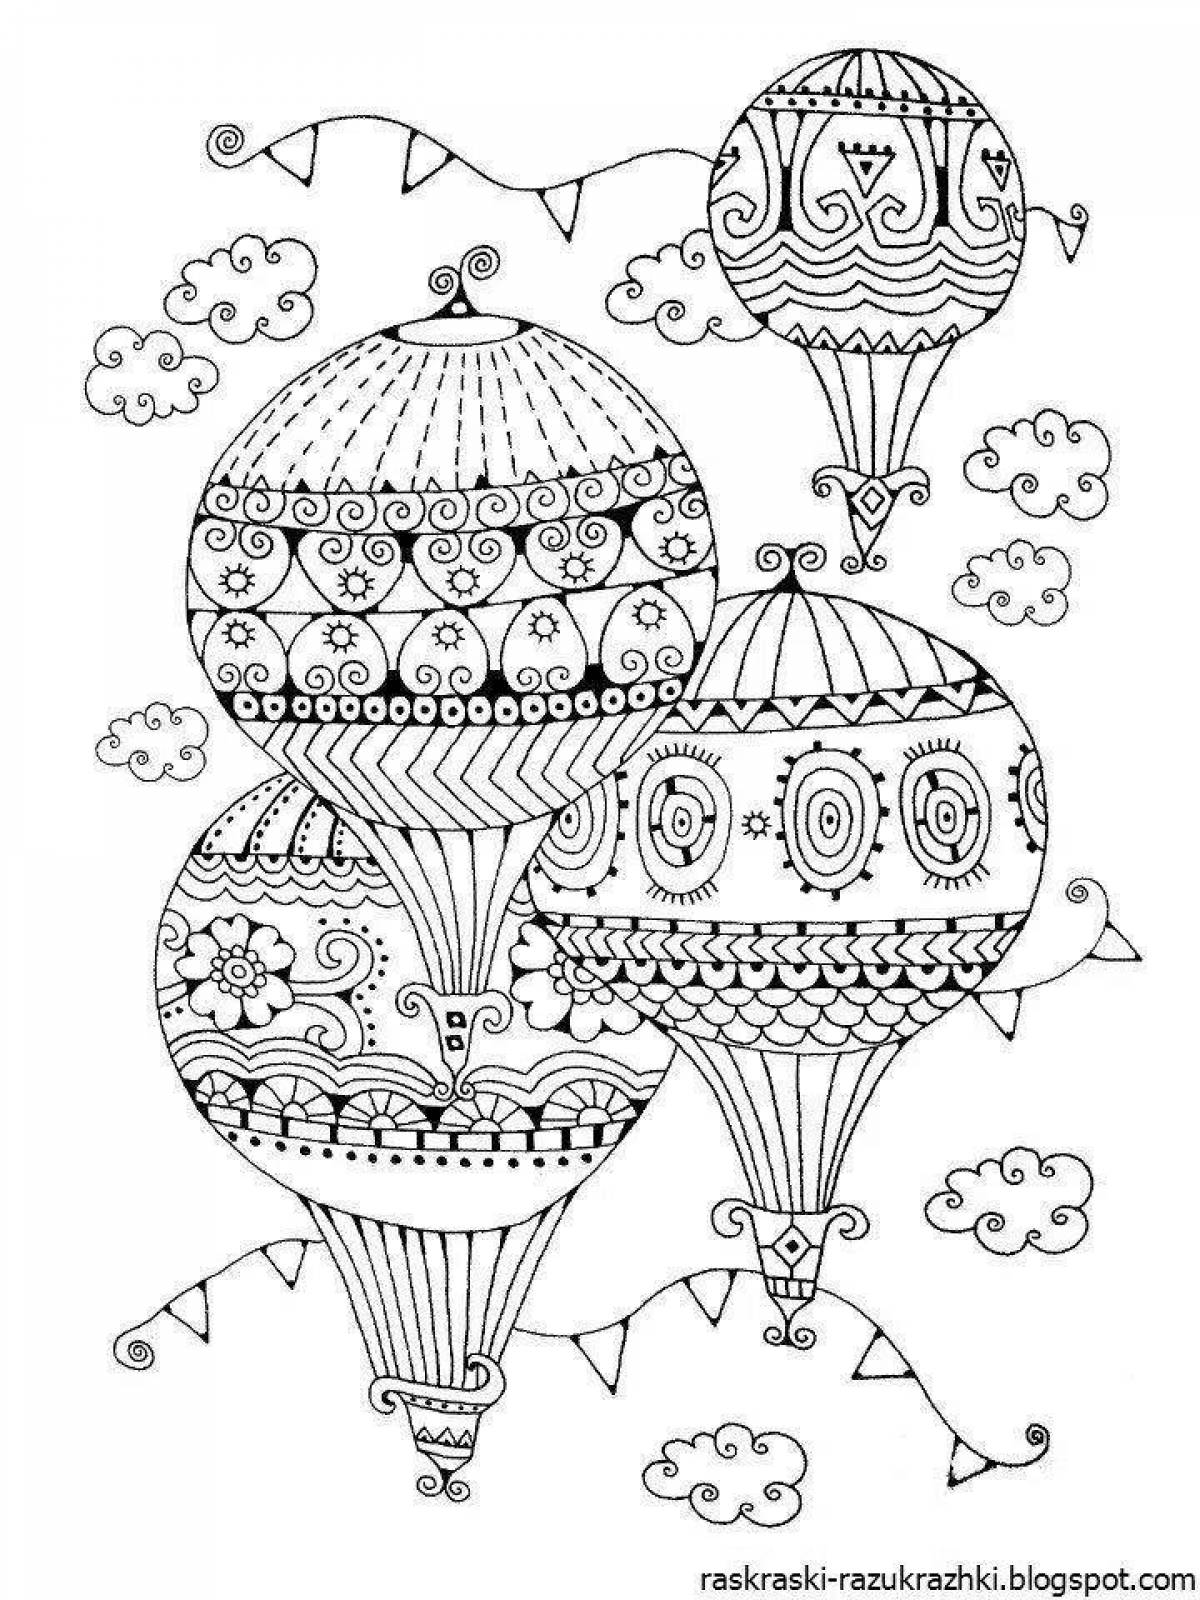 Adorable anti-stress coloring book for 7-8 year olds